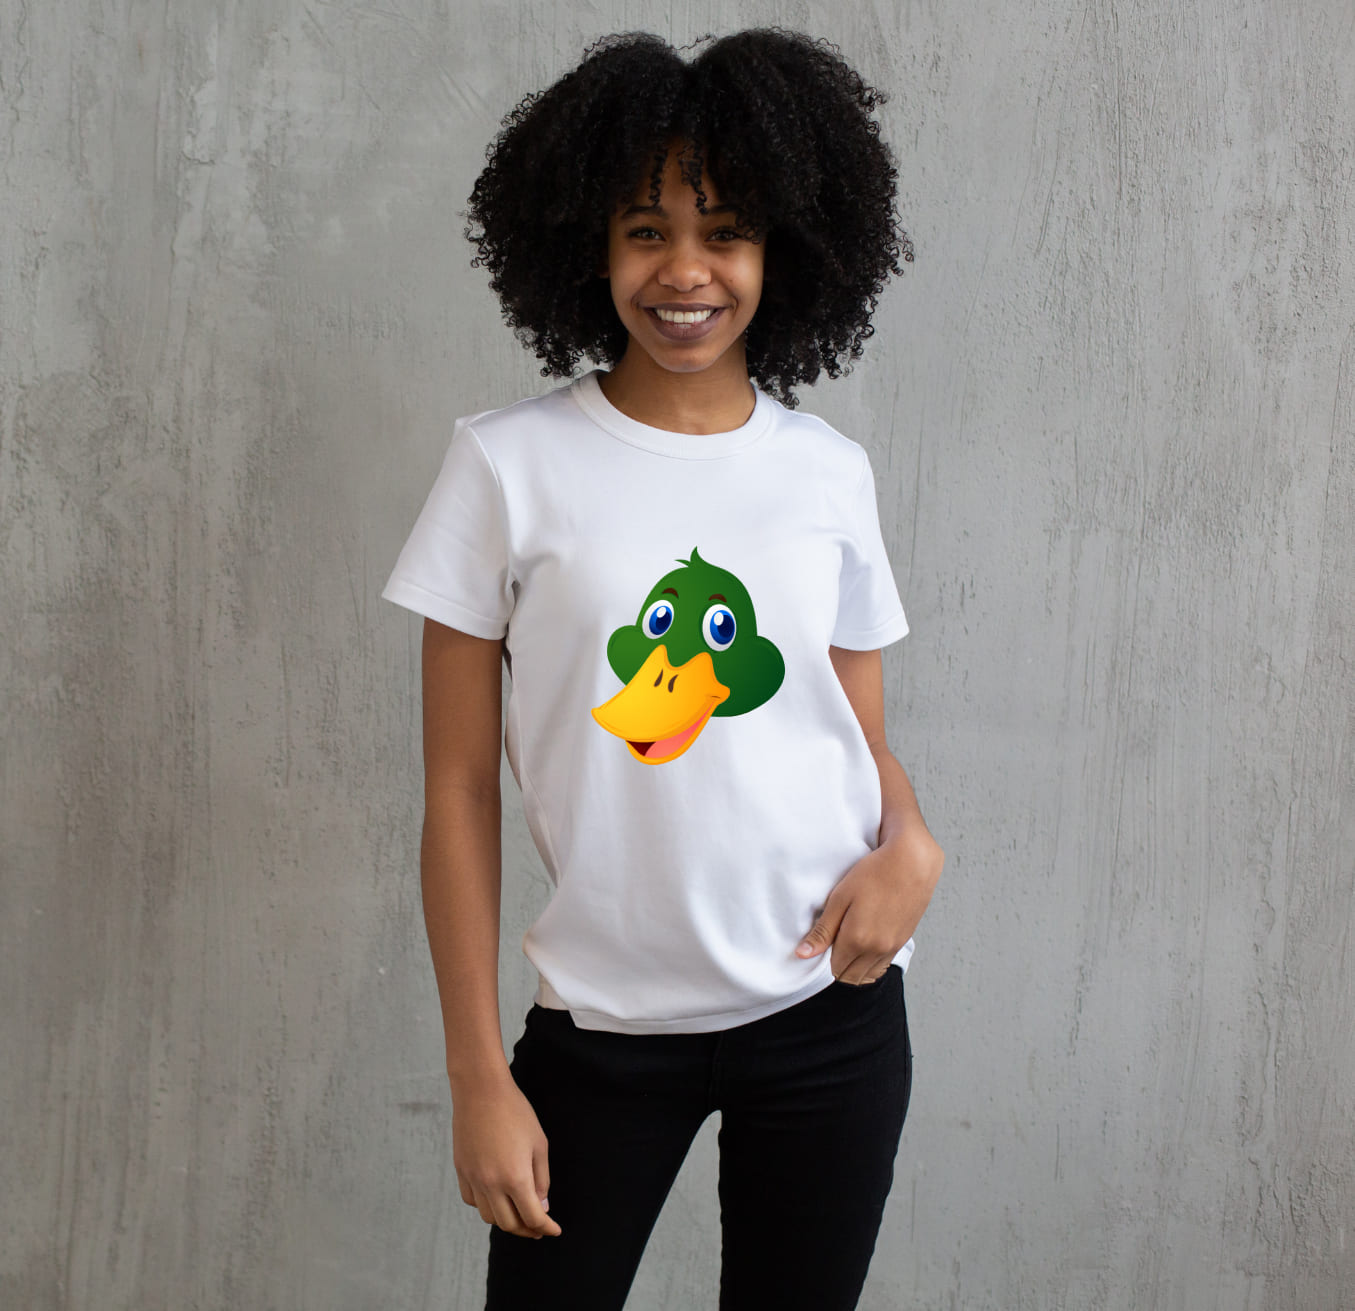 Image of a white t-shirt with an irresistible green duck head print.